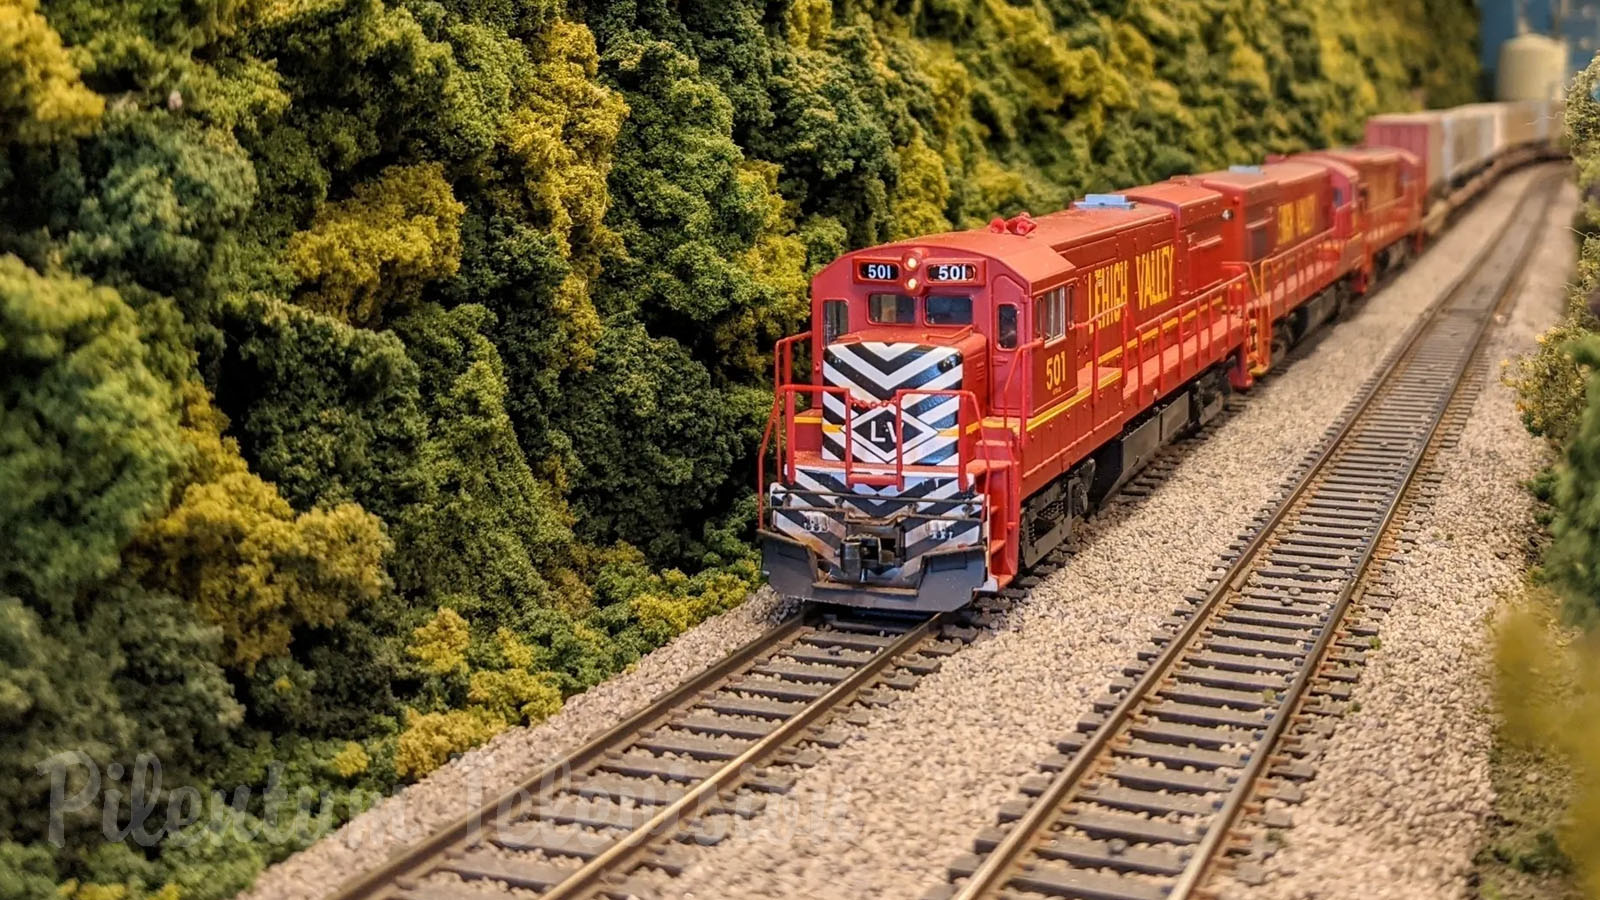 One of the largest model railroad HO scale layouts in the United States: The Lehigh & Keystone Valley Museum